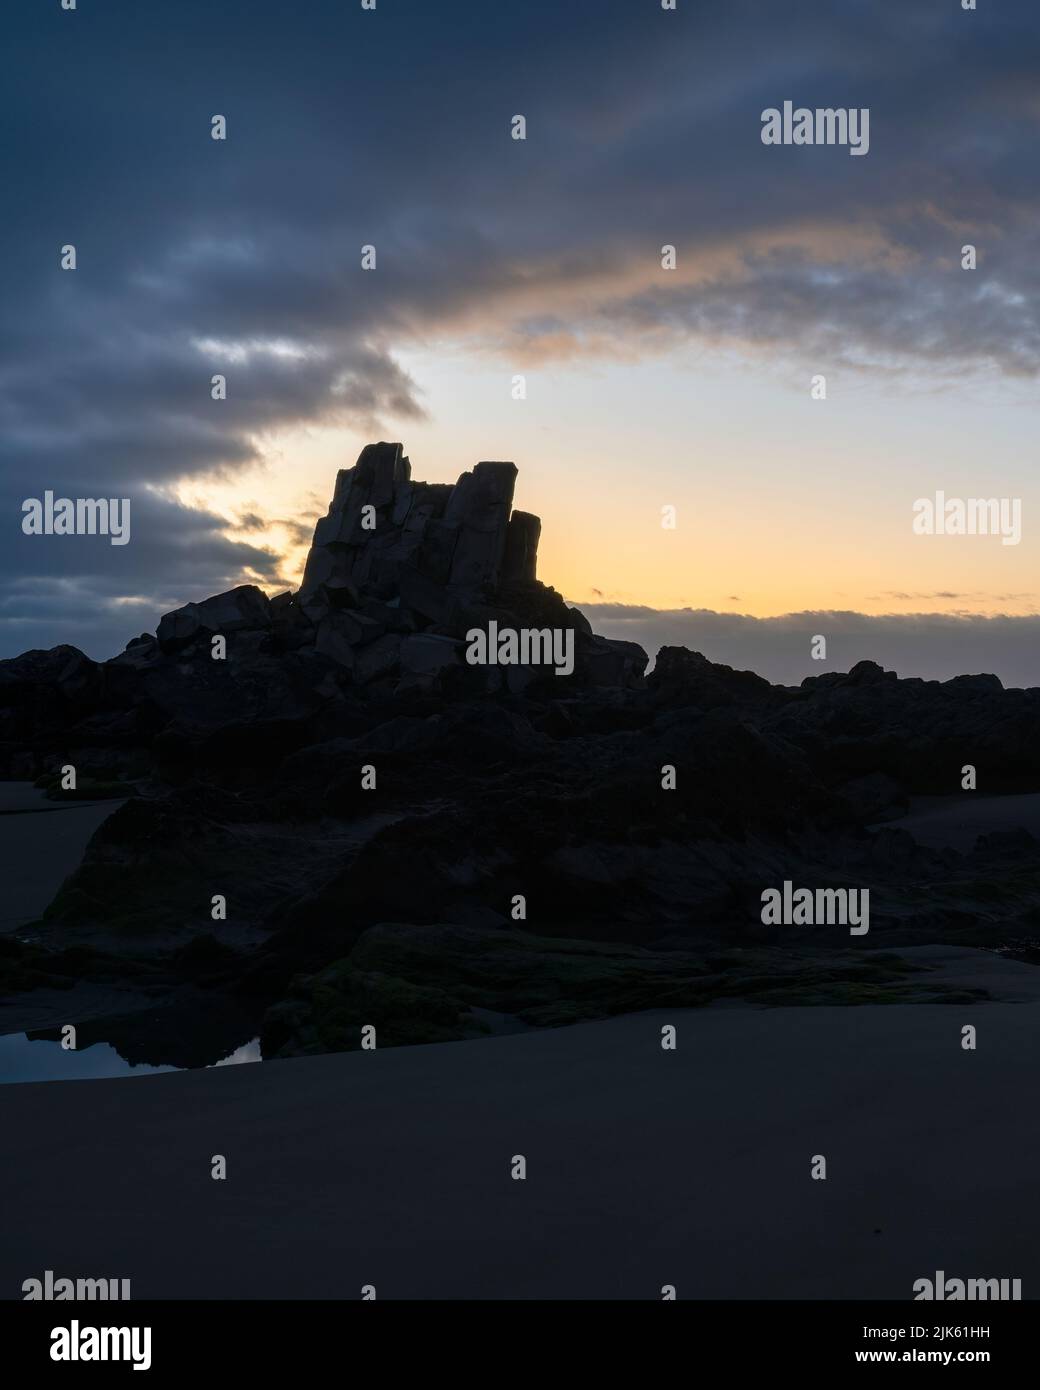 Silhouette image of Shag Rock, also known as Rapanui, Christchurch. Vertical format. Stock Photo